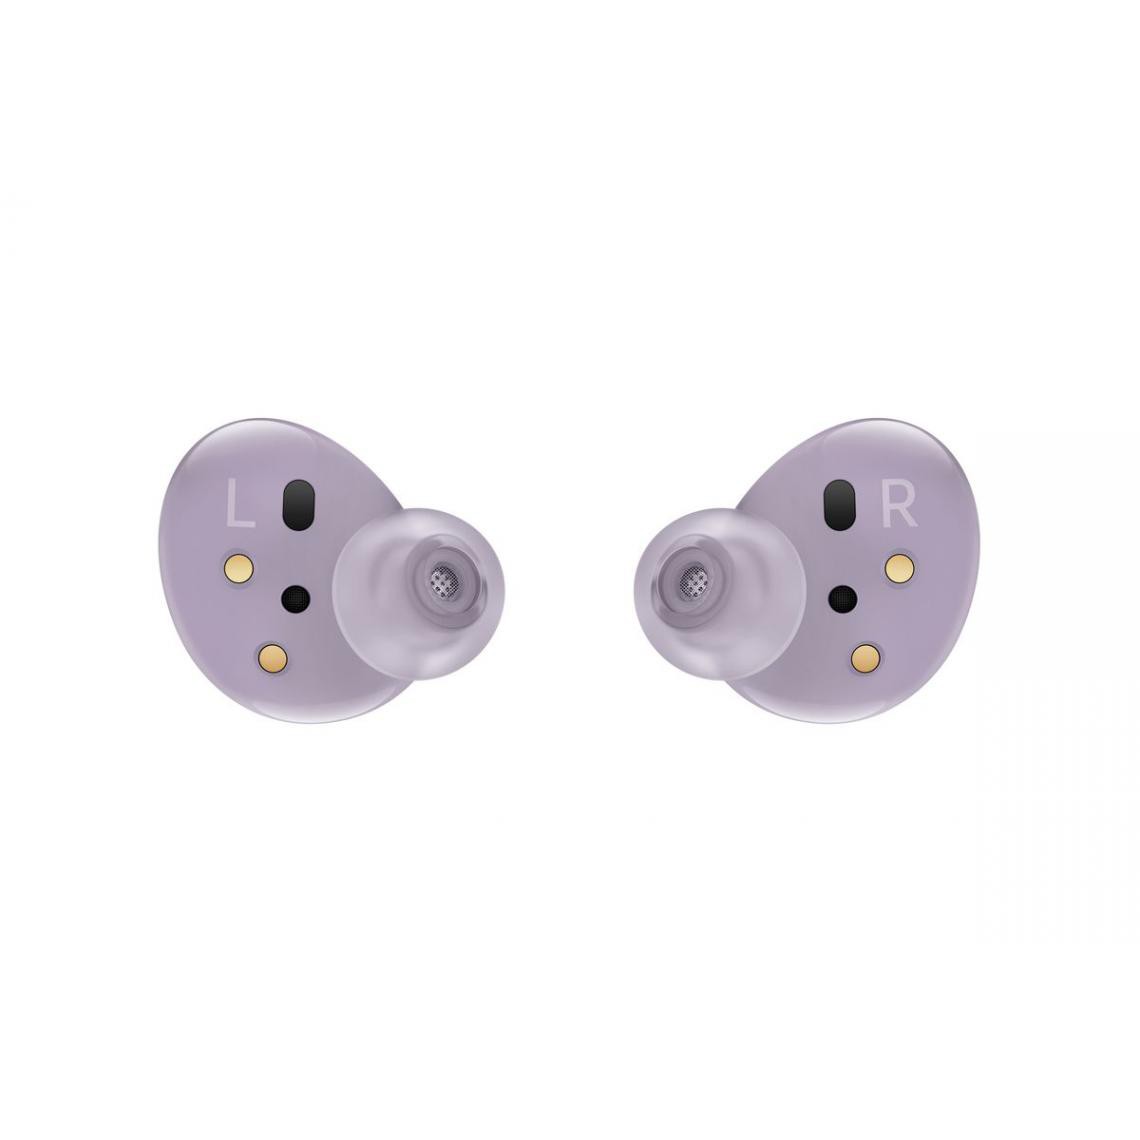 Samsung - Galaxy Buds2 - Ecouteurs True Wireless - Violet - Ecouteurs intra-auriculaires